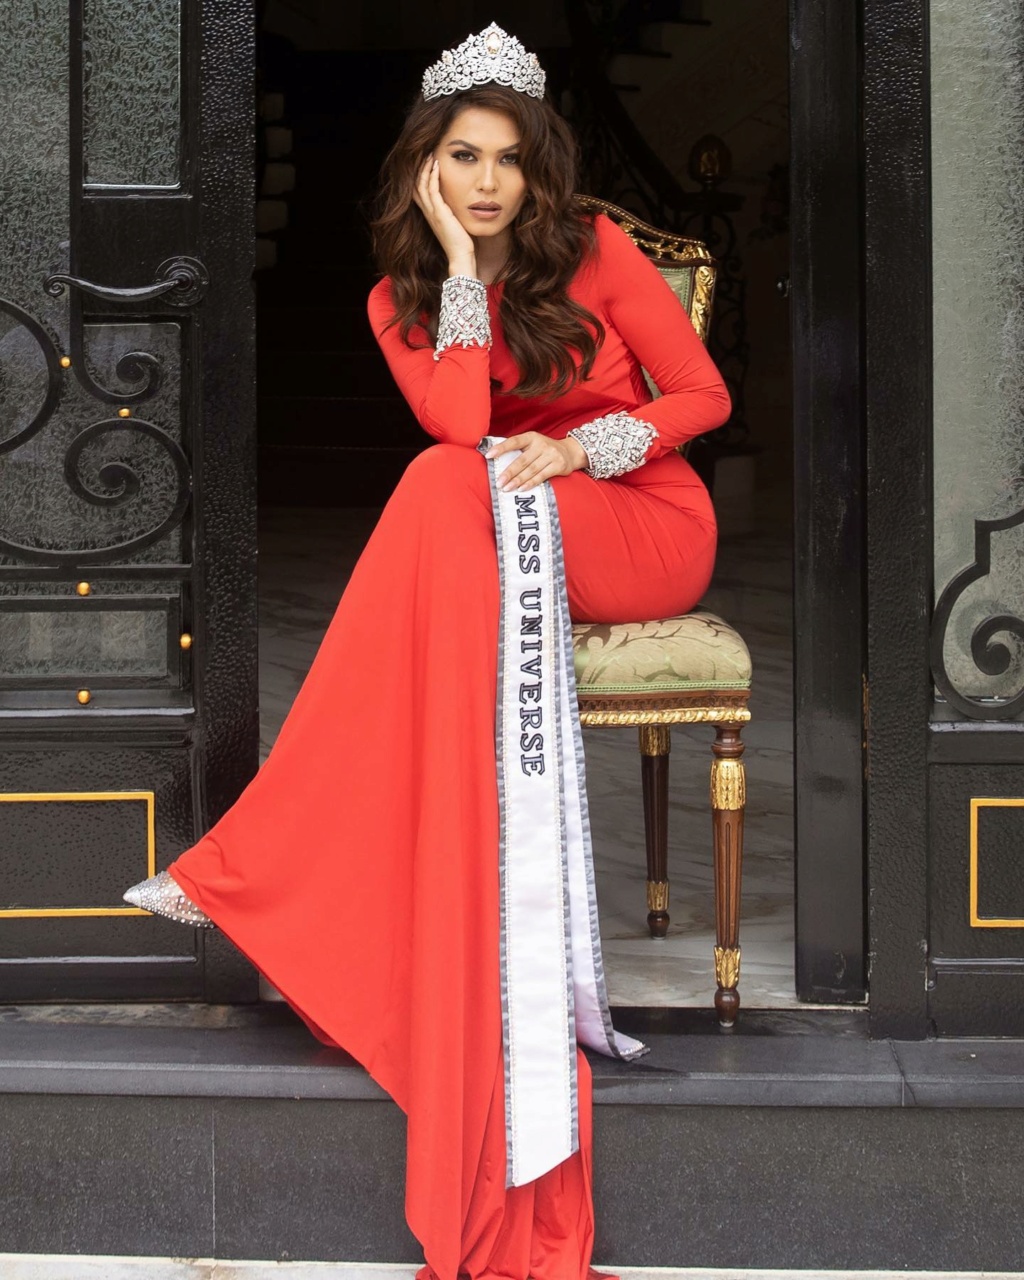 The Official Thread Of Miss Universe 2020 - Andrea Meza of Mexico  - Page 7 24334311